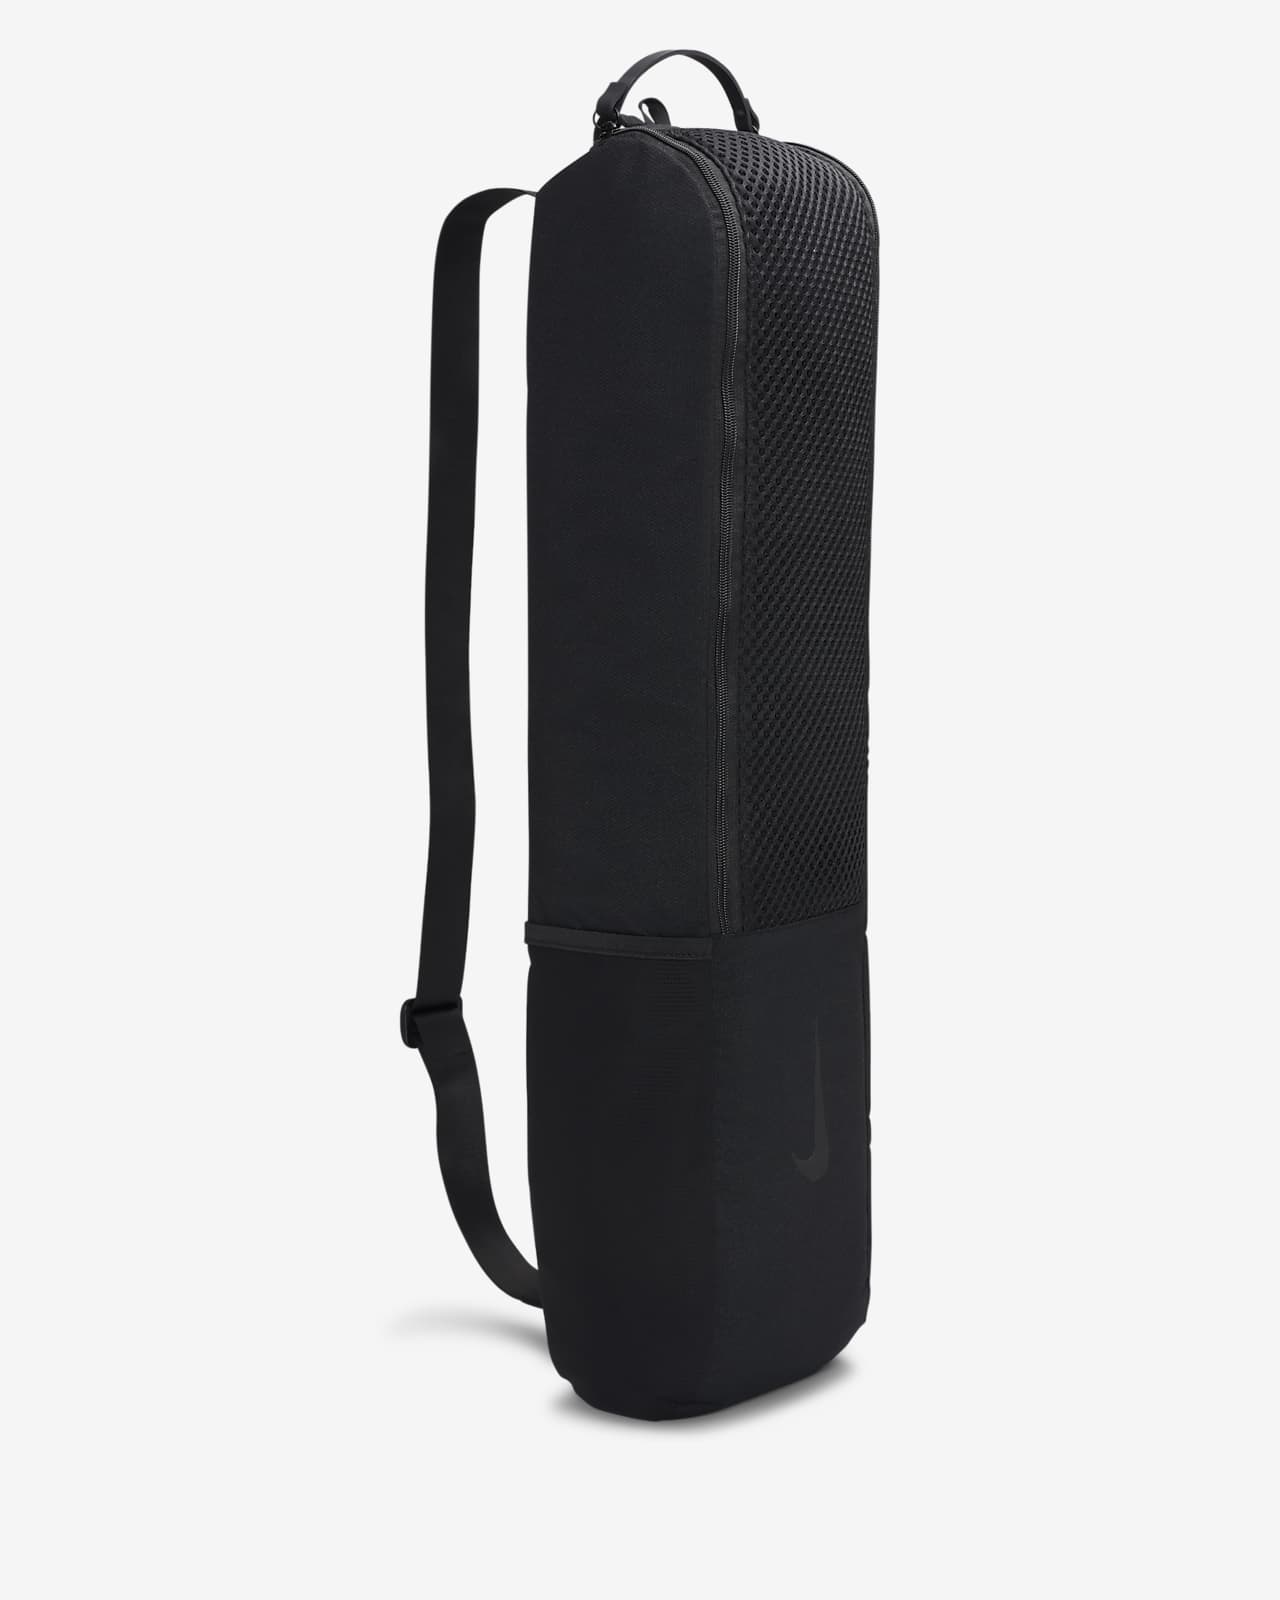 Women's Gym Accessories, Yoga Mats, Bags & More